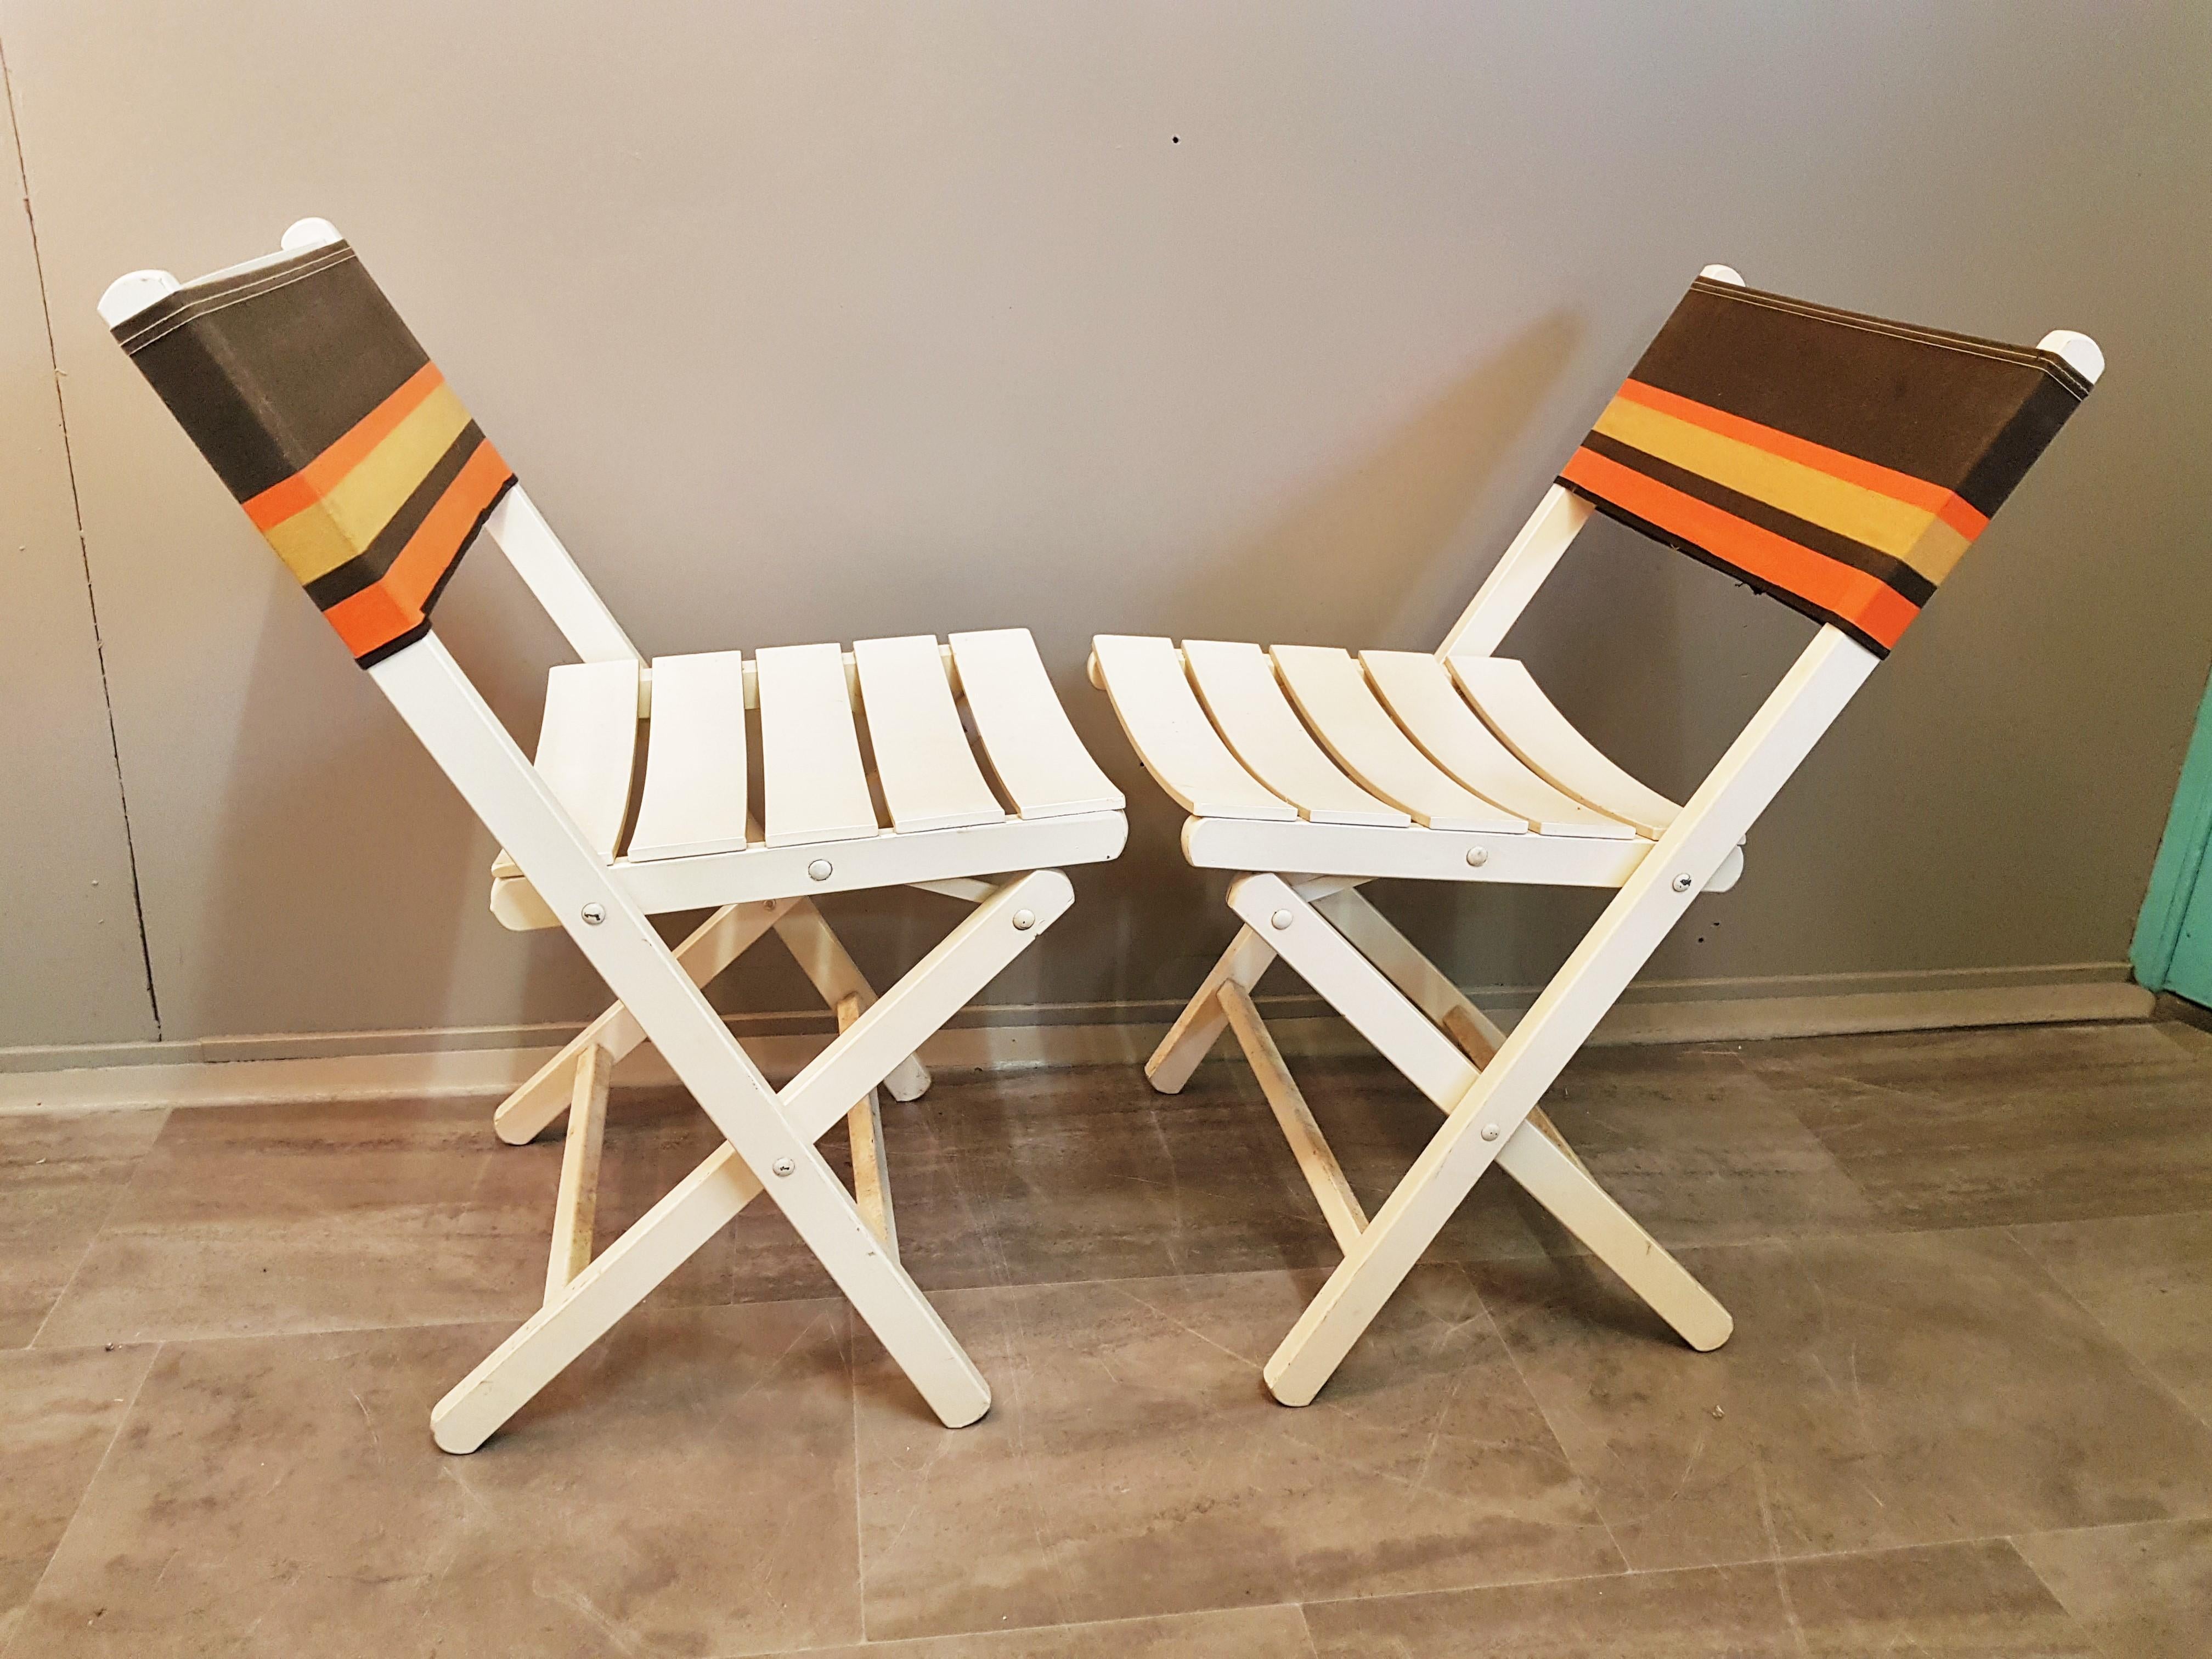 Boho Chic Set of 6 Midcentury Folding Chairs, France, 1960s For Sale 6